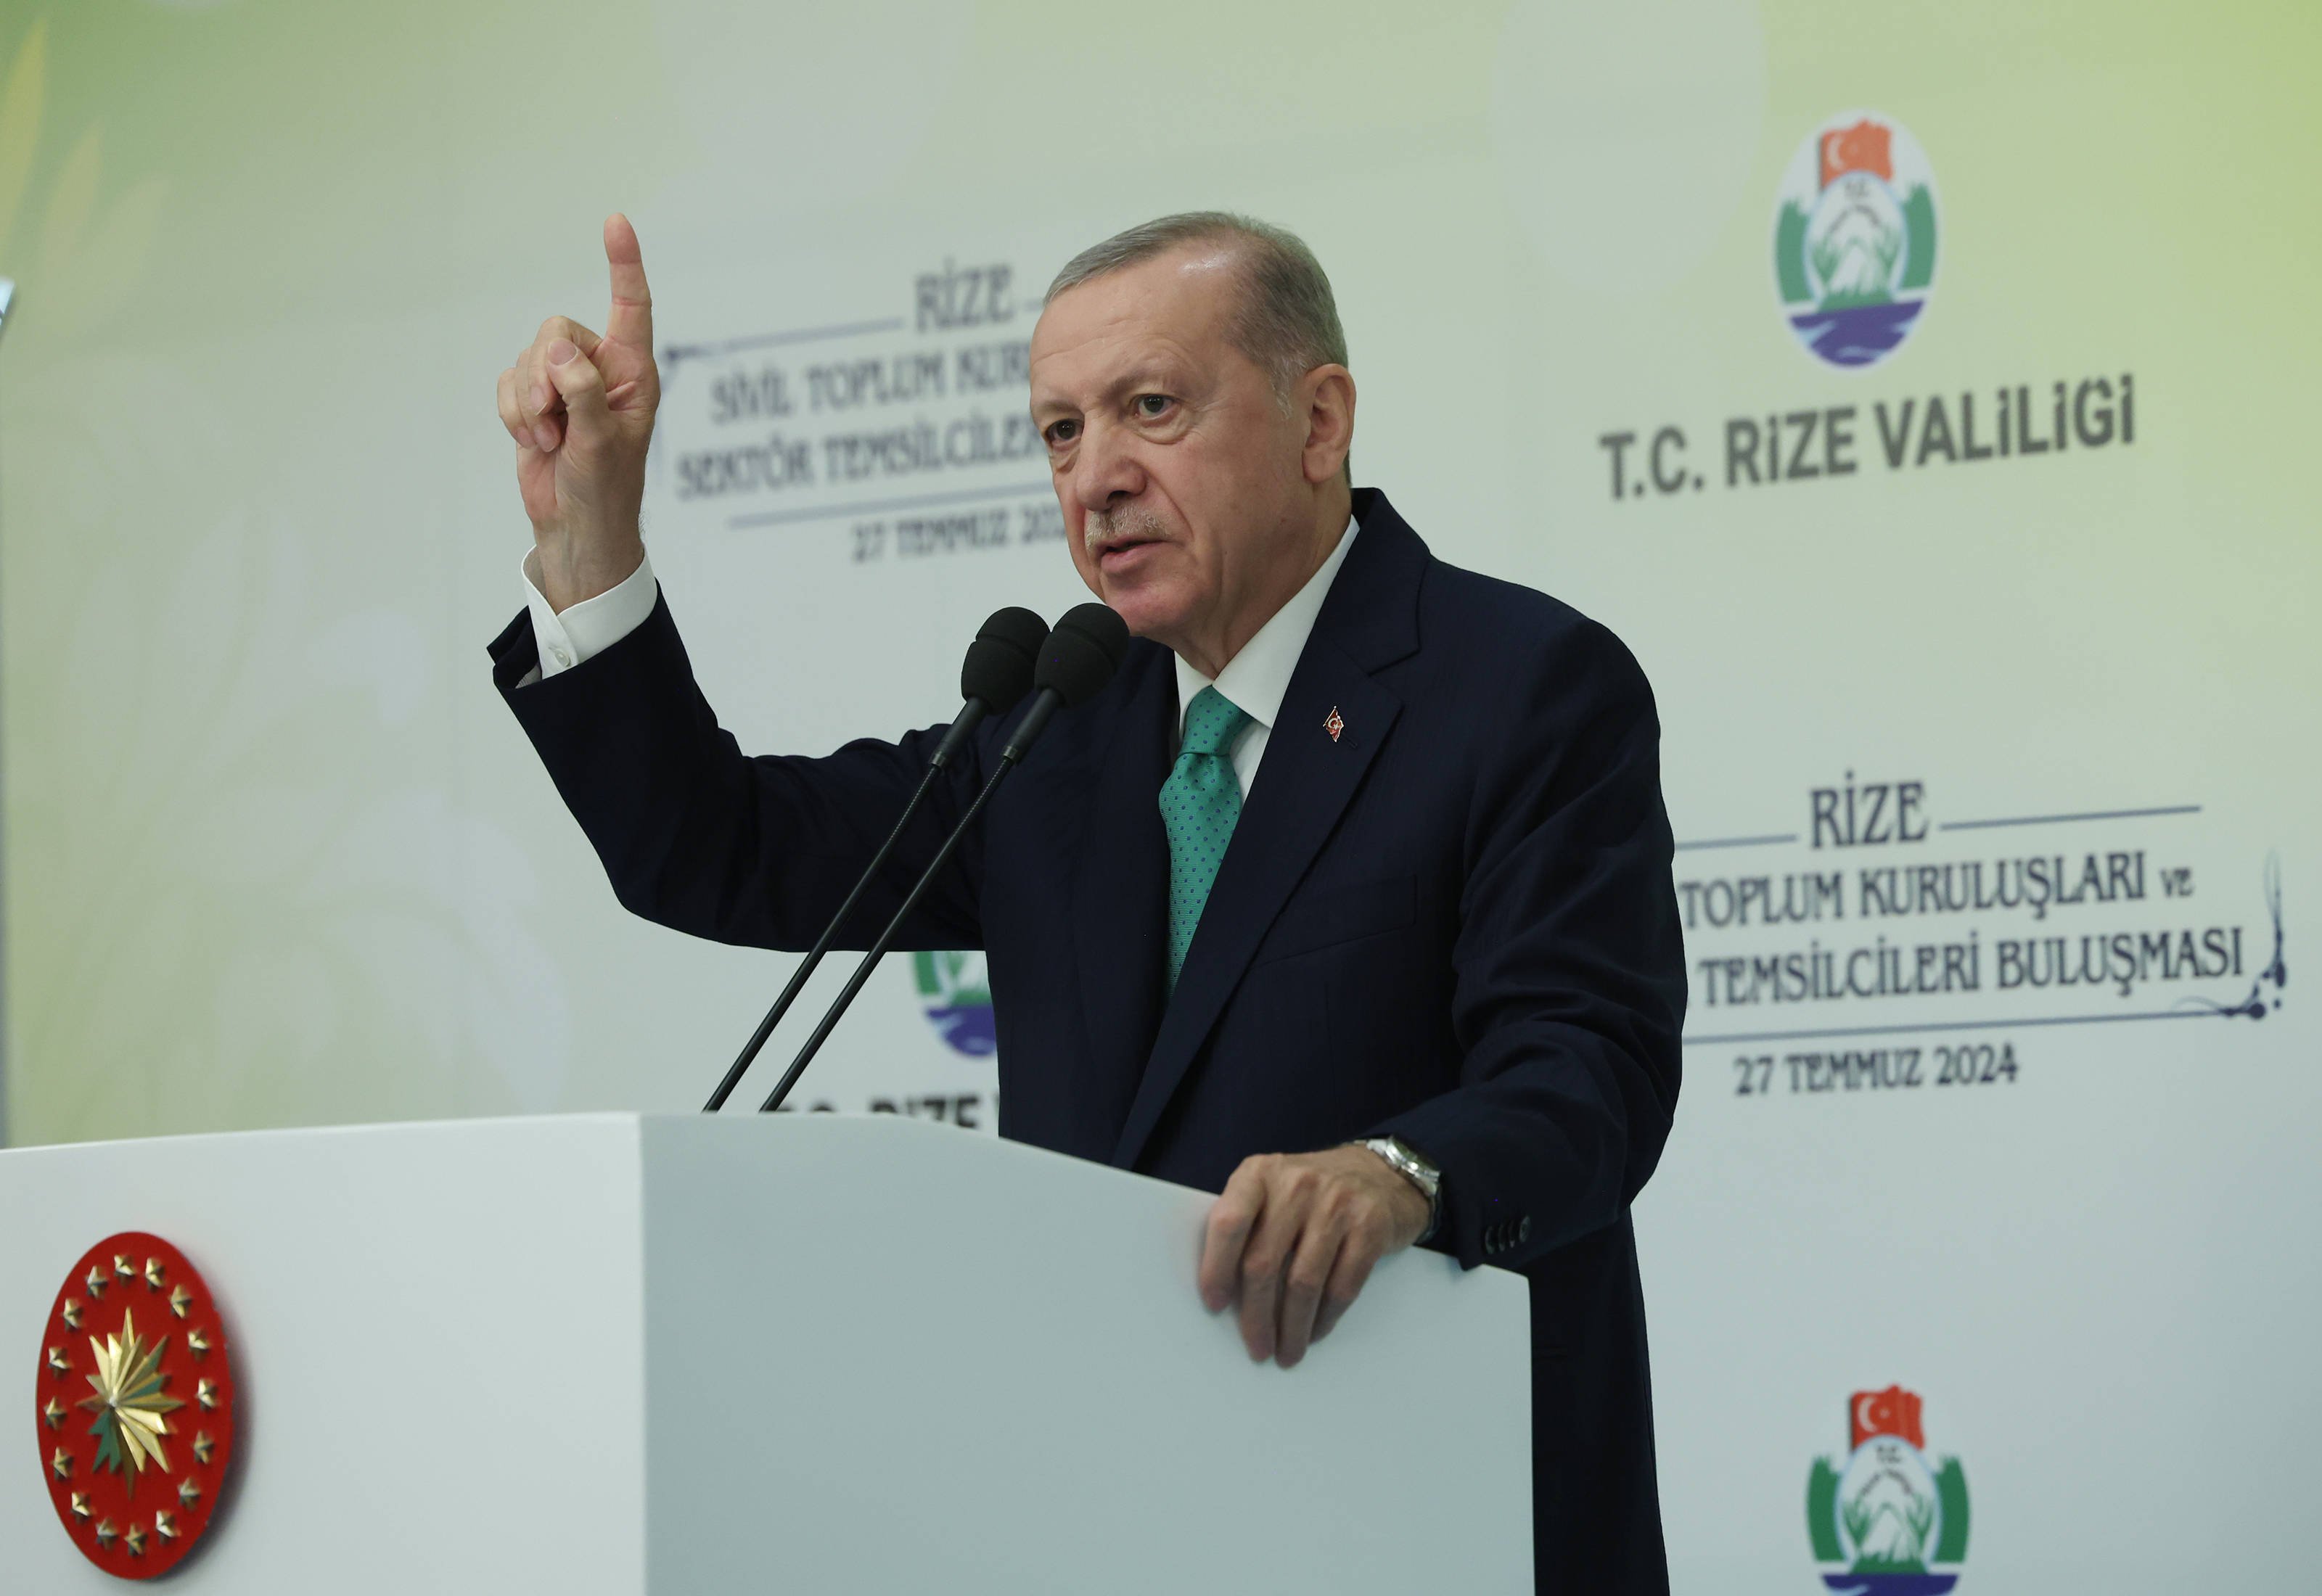 Erdoğan says Turkey could use military force against Israel ‘just as we did in Karabakh and Libya’